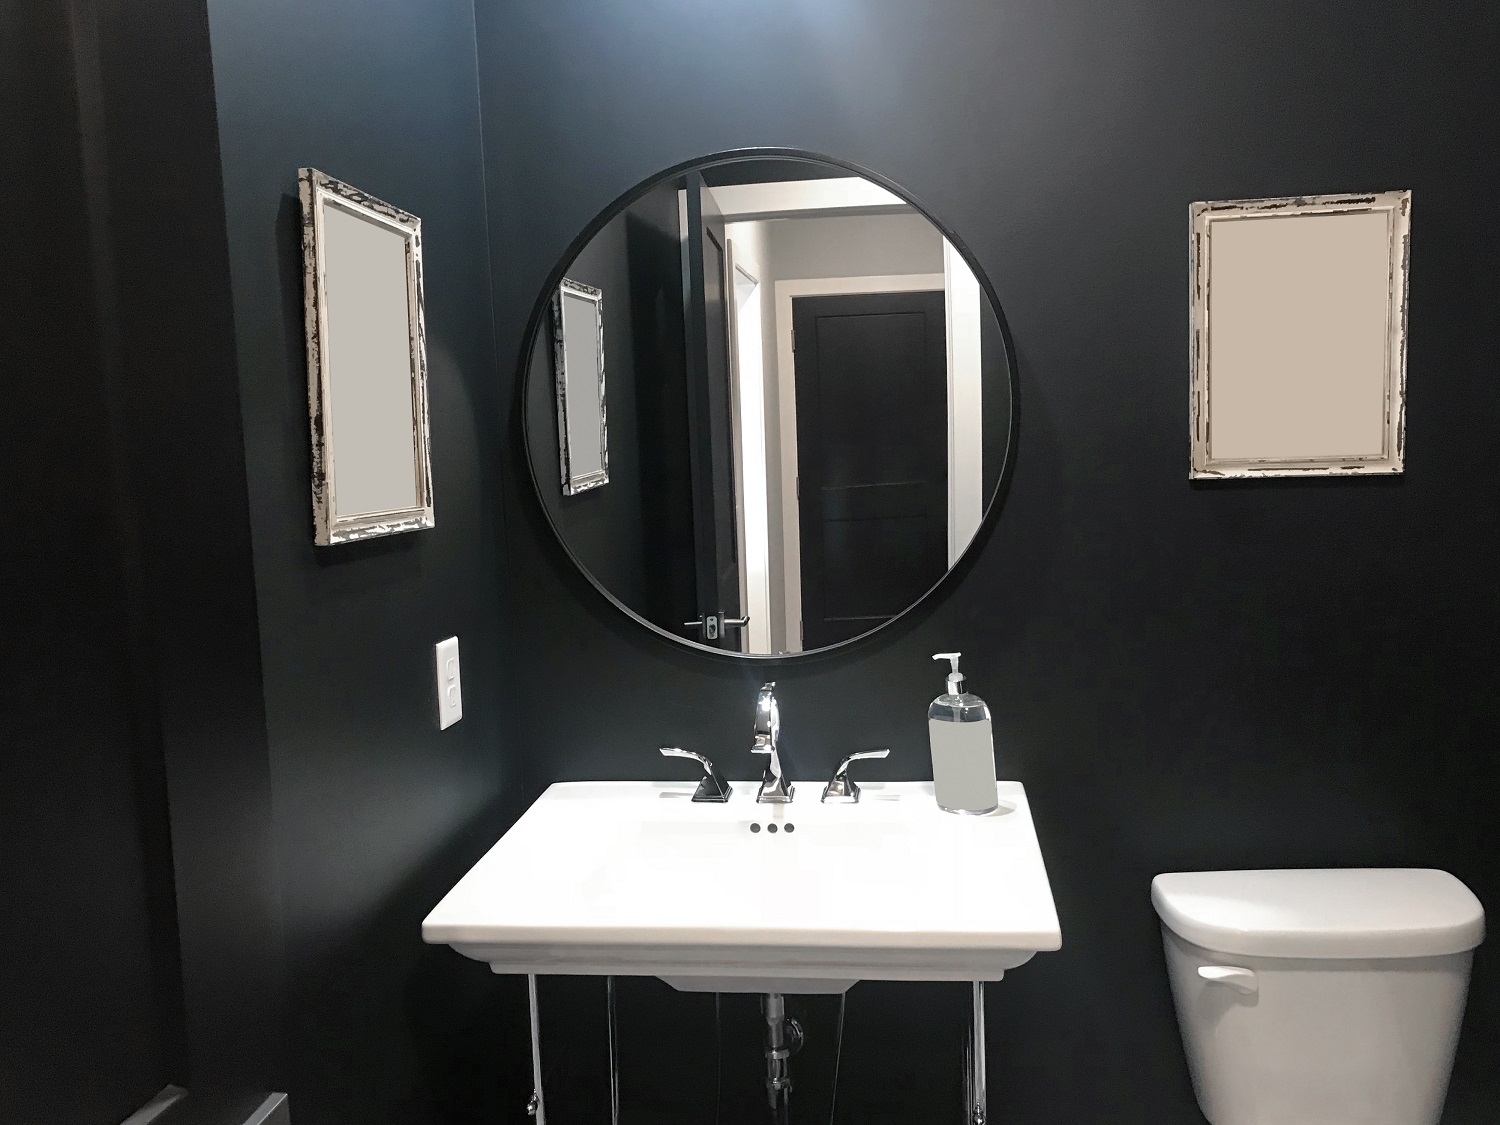 Lifestyle image of a black and white bathroom, with black wall and white ceramics